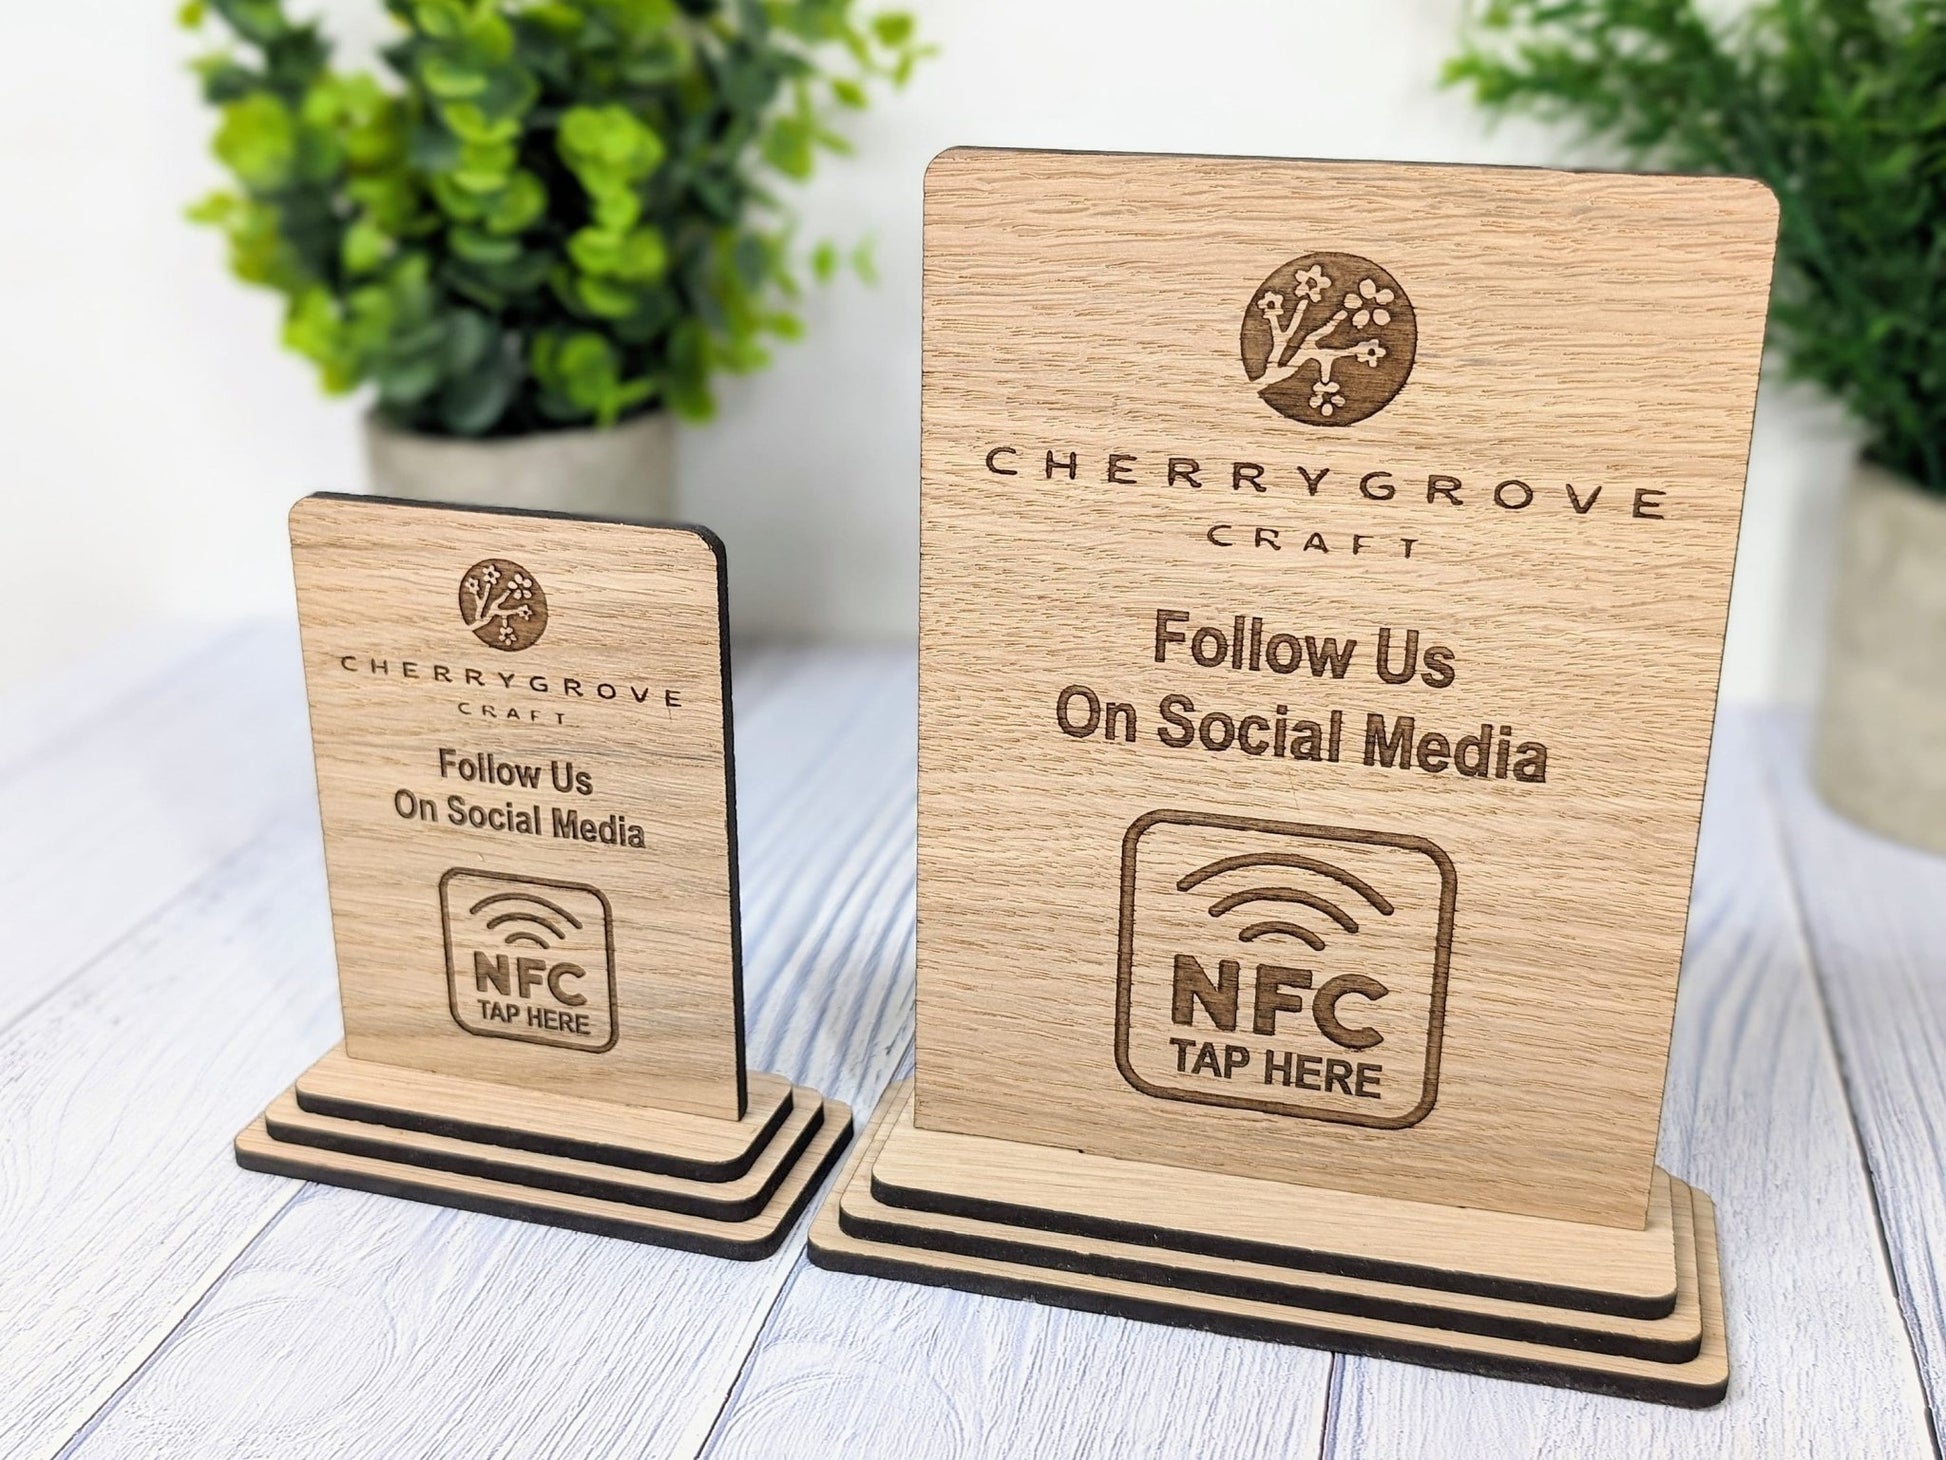 NFC 'Tap Here' Wooden Follow Us Sign - Personalised Logo, Eco-Friendly, Handmade, Social Media Link, NFC tag, 2 Sizes - CherryGroveCraft